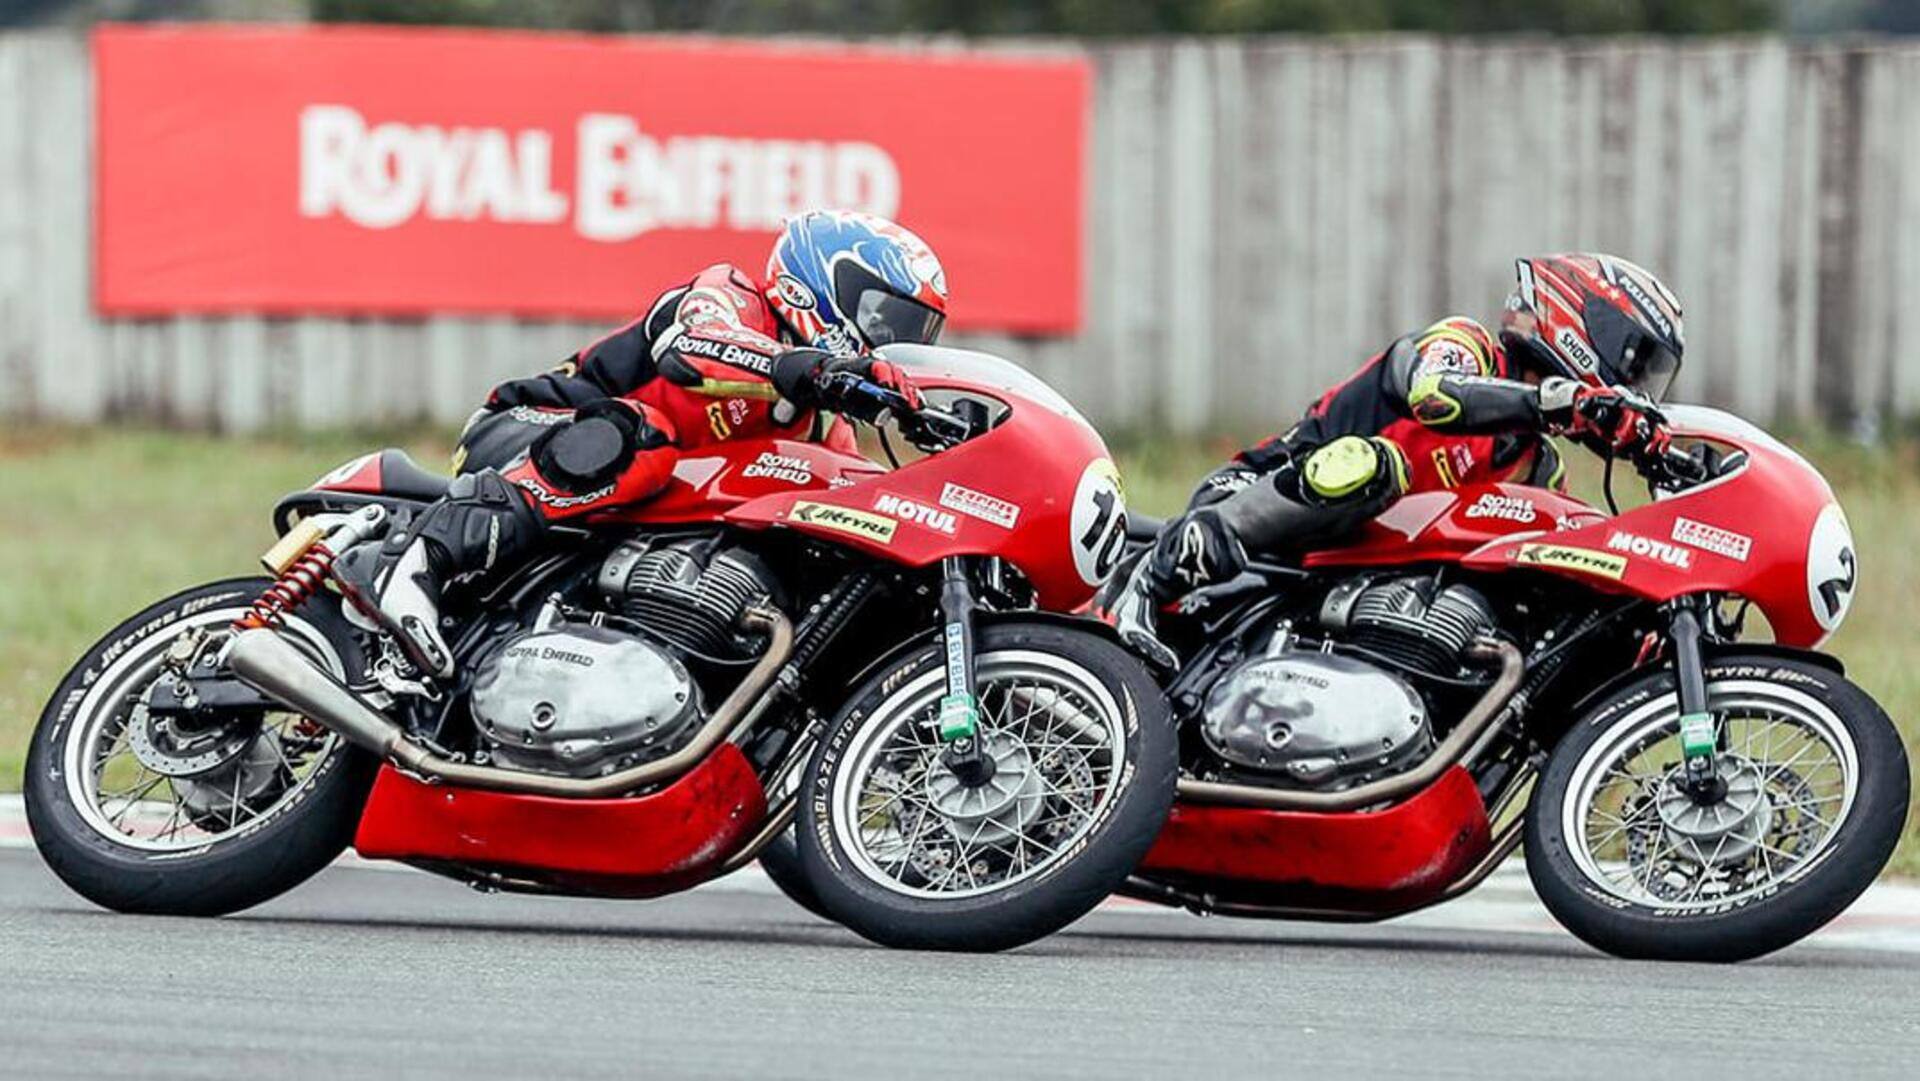 Here's how Royal Enfield is redefining one-make racing in India